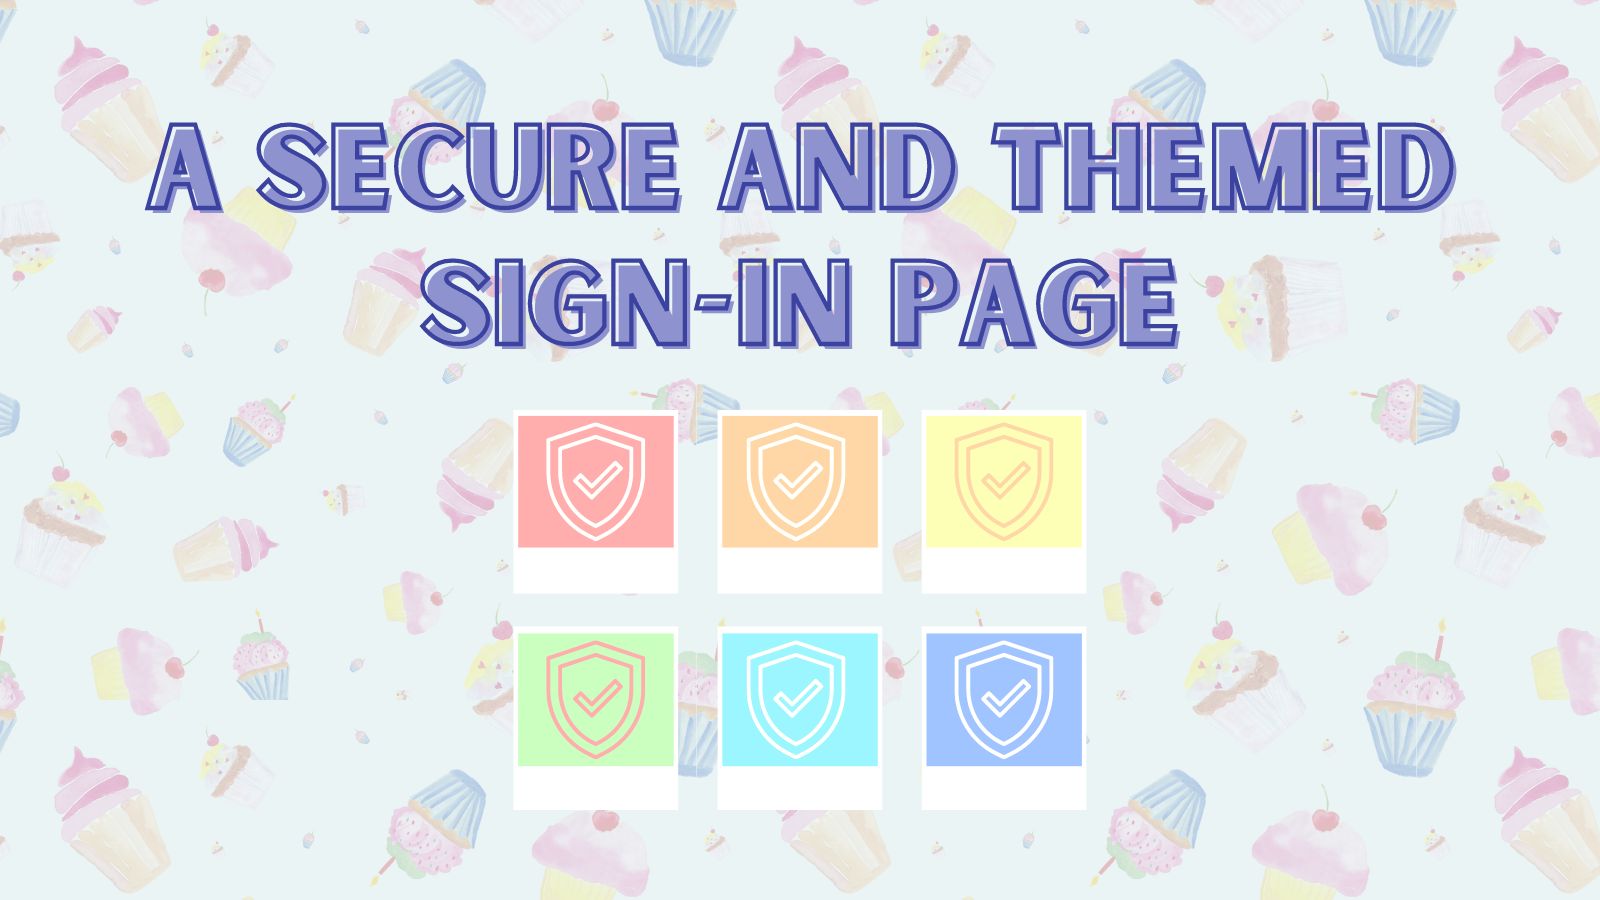 A Secure and Themed Sign-in Page